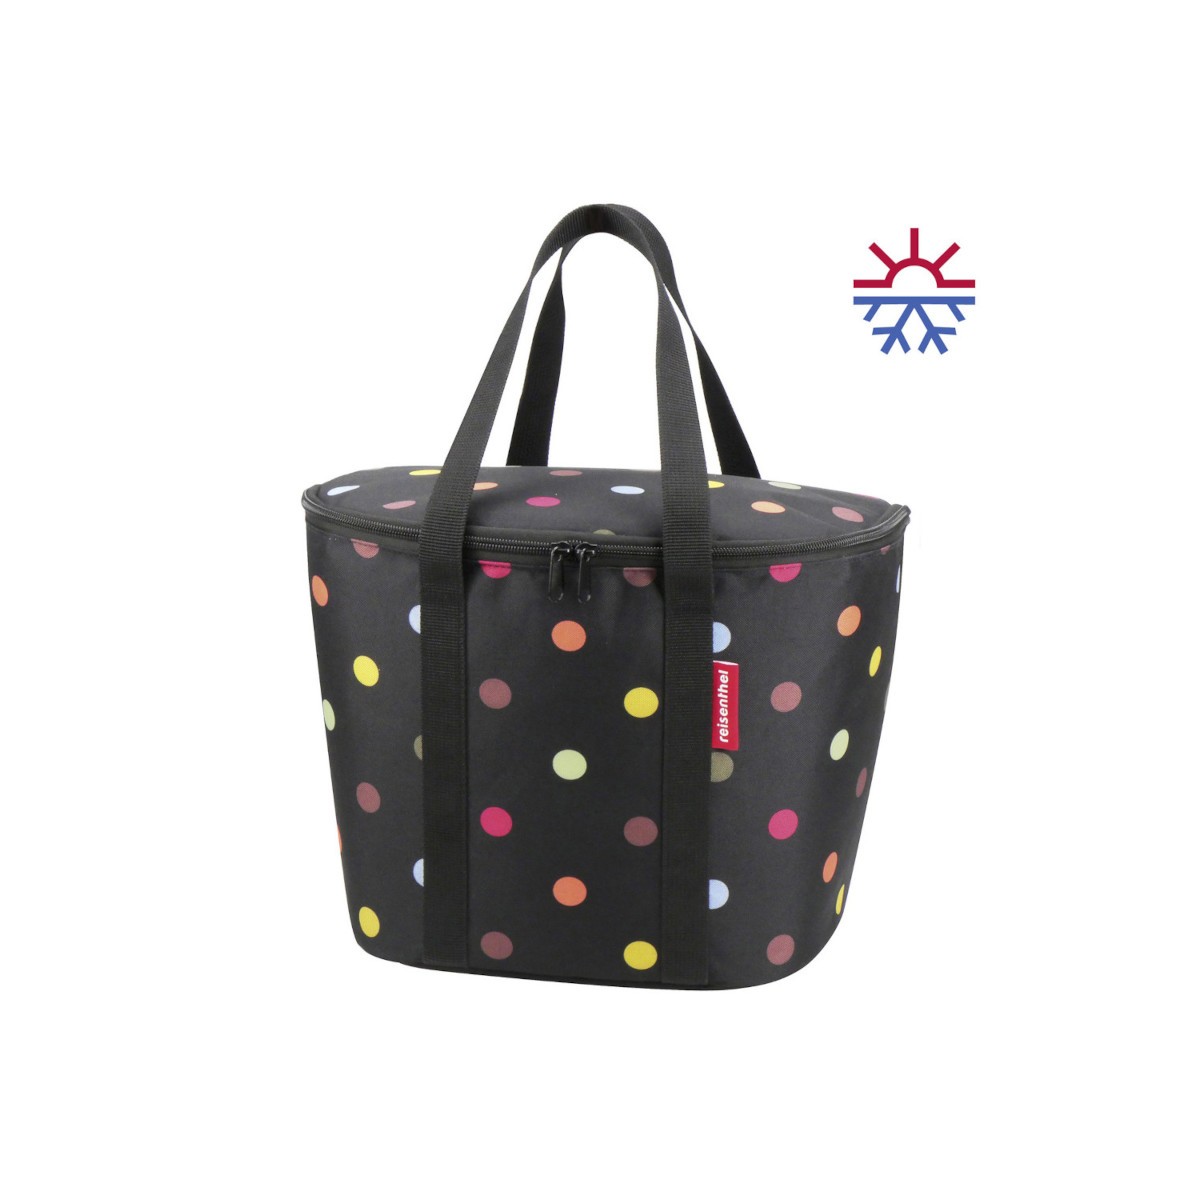 Sac Isotherme pour paniers Poids